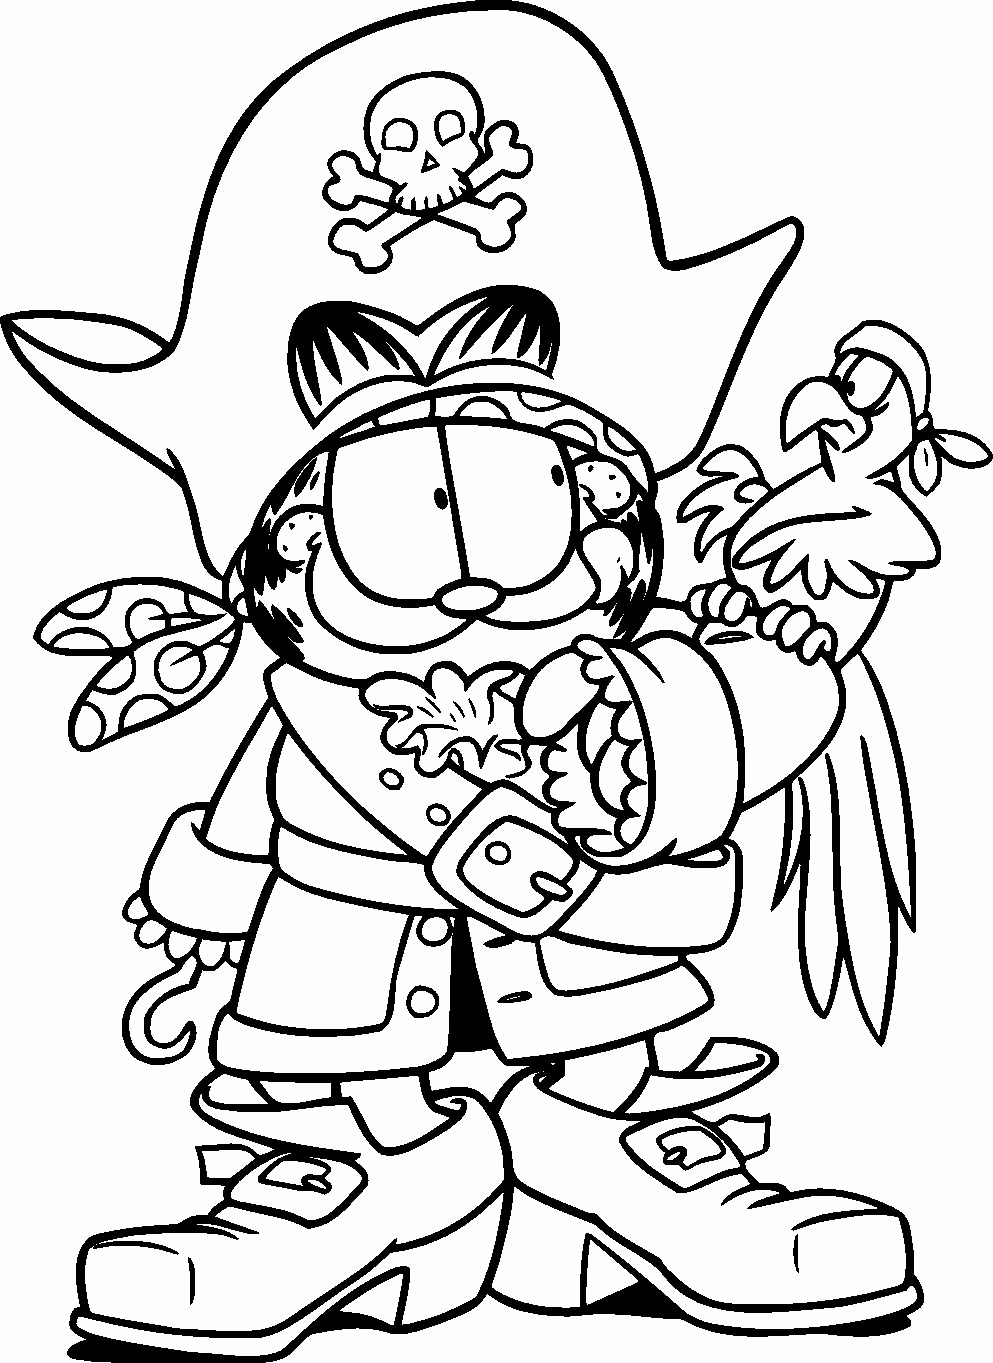 The best free Garfield coloring page images. Download from 279 free